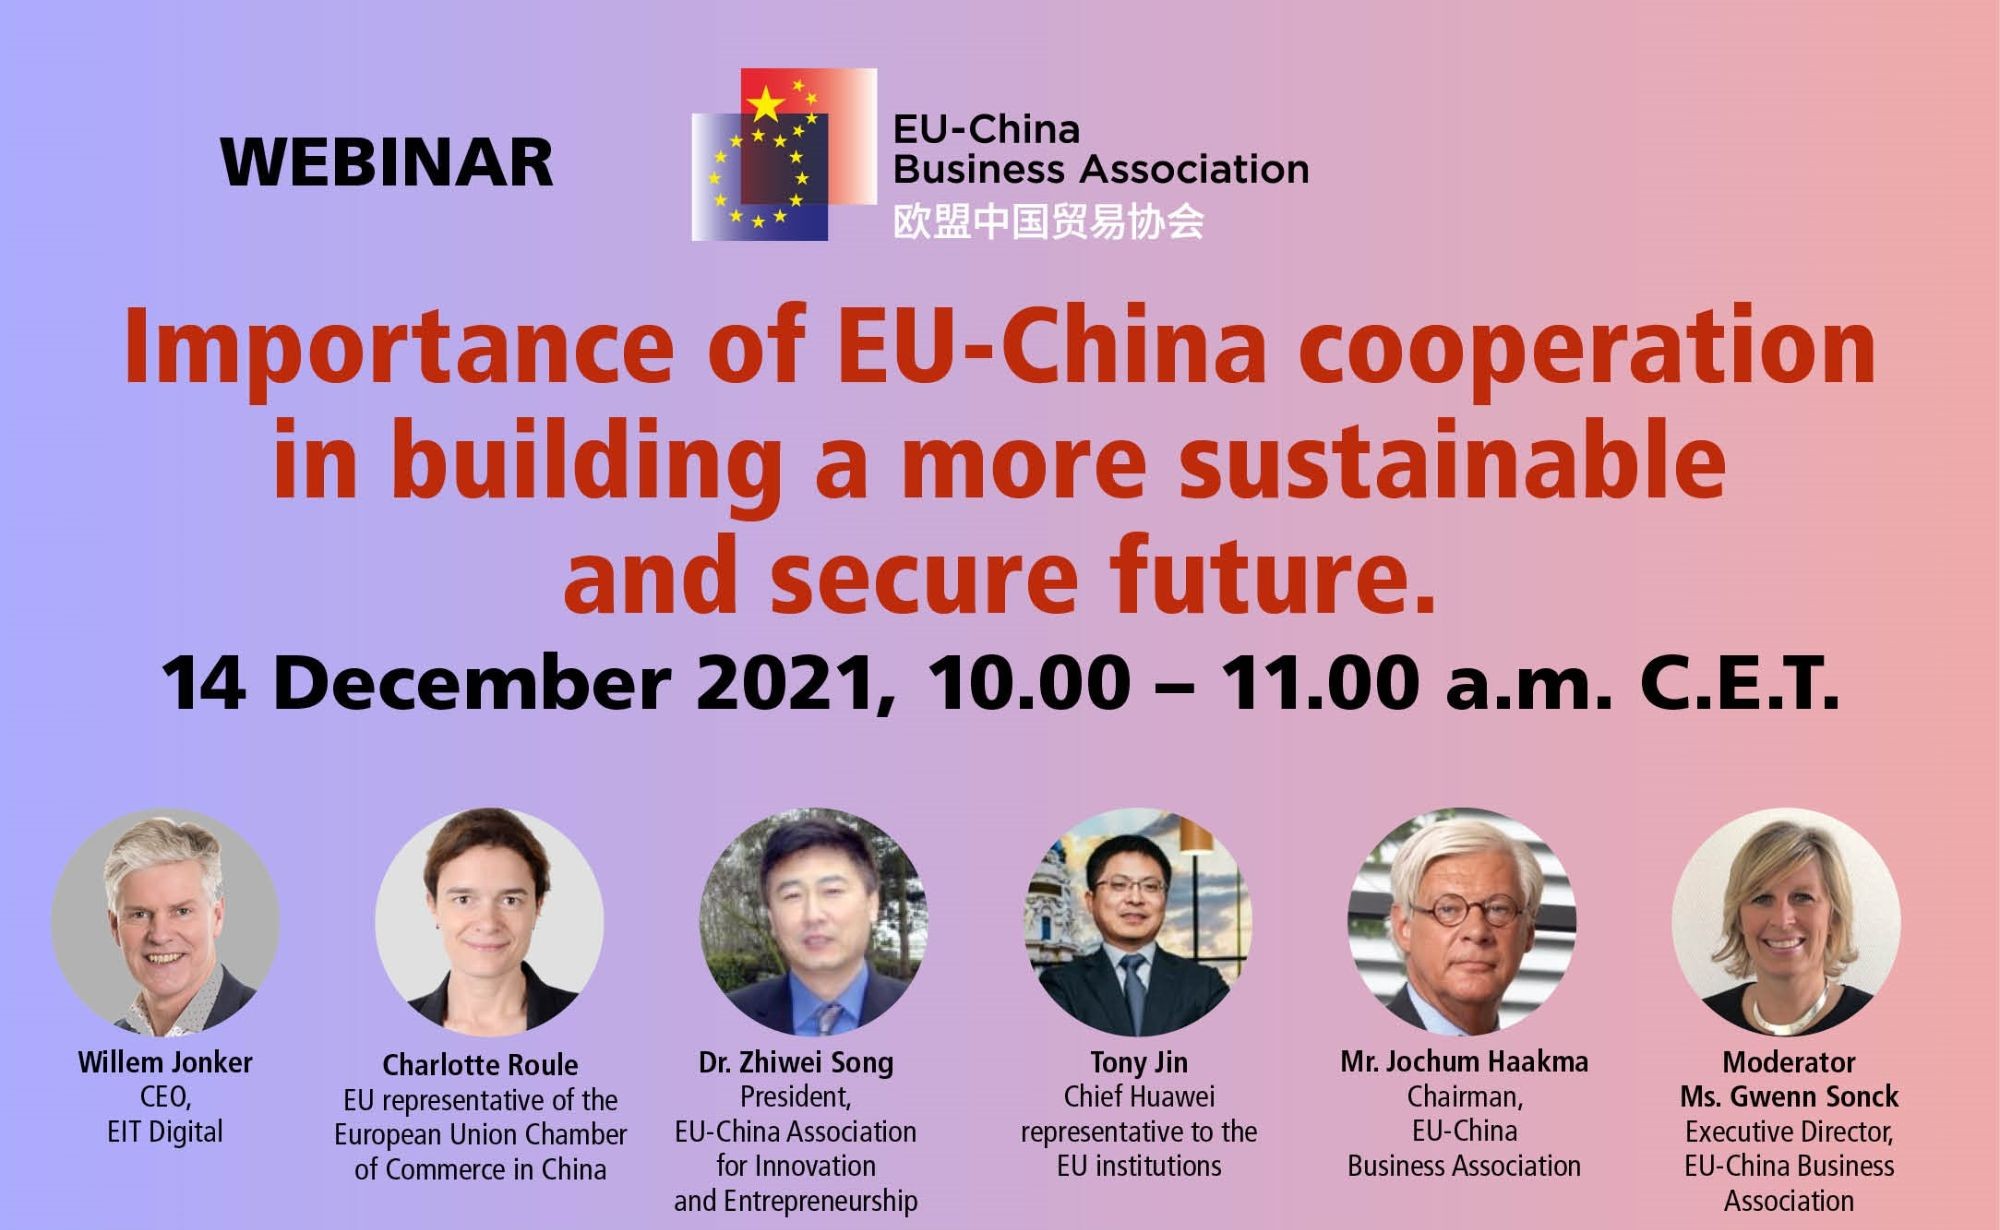 Webinar: The importance of EU-China co-operation in building a more sustainable and secure future